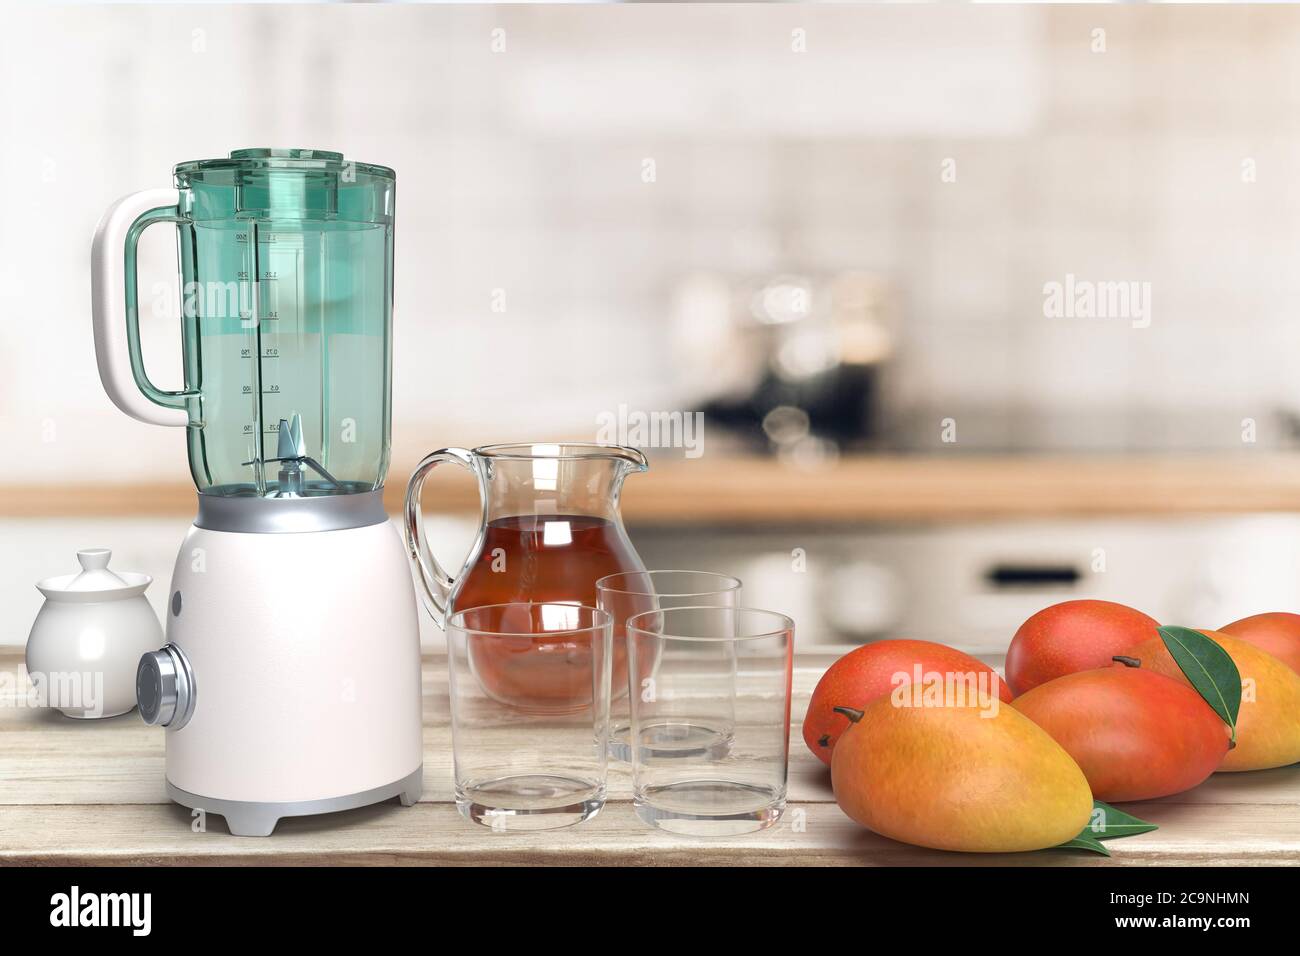 Mixer grinder stock photography and images